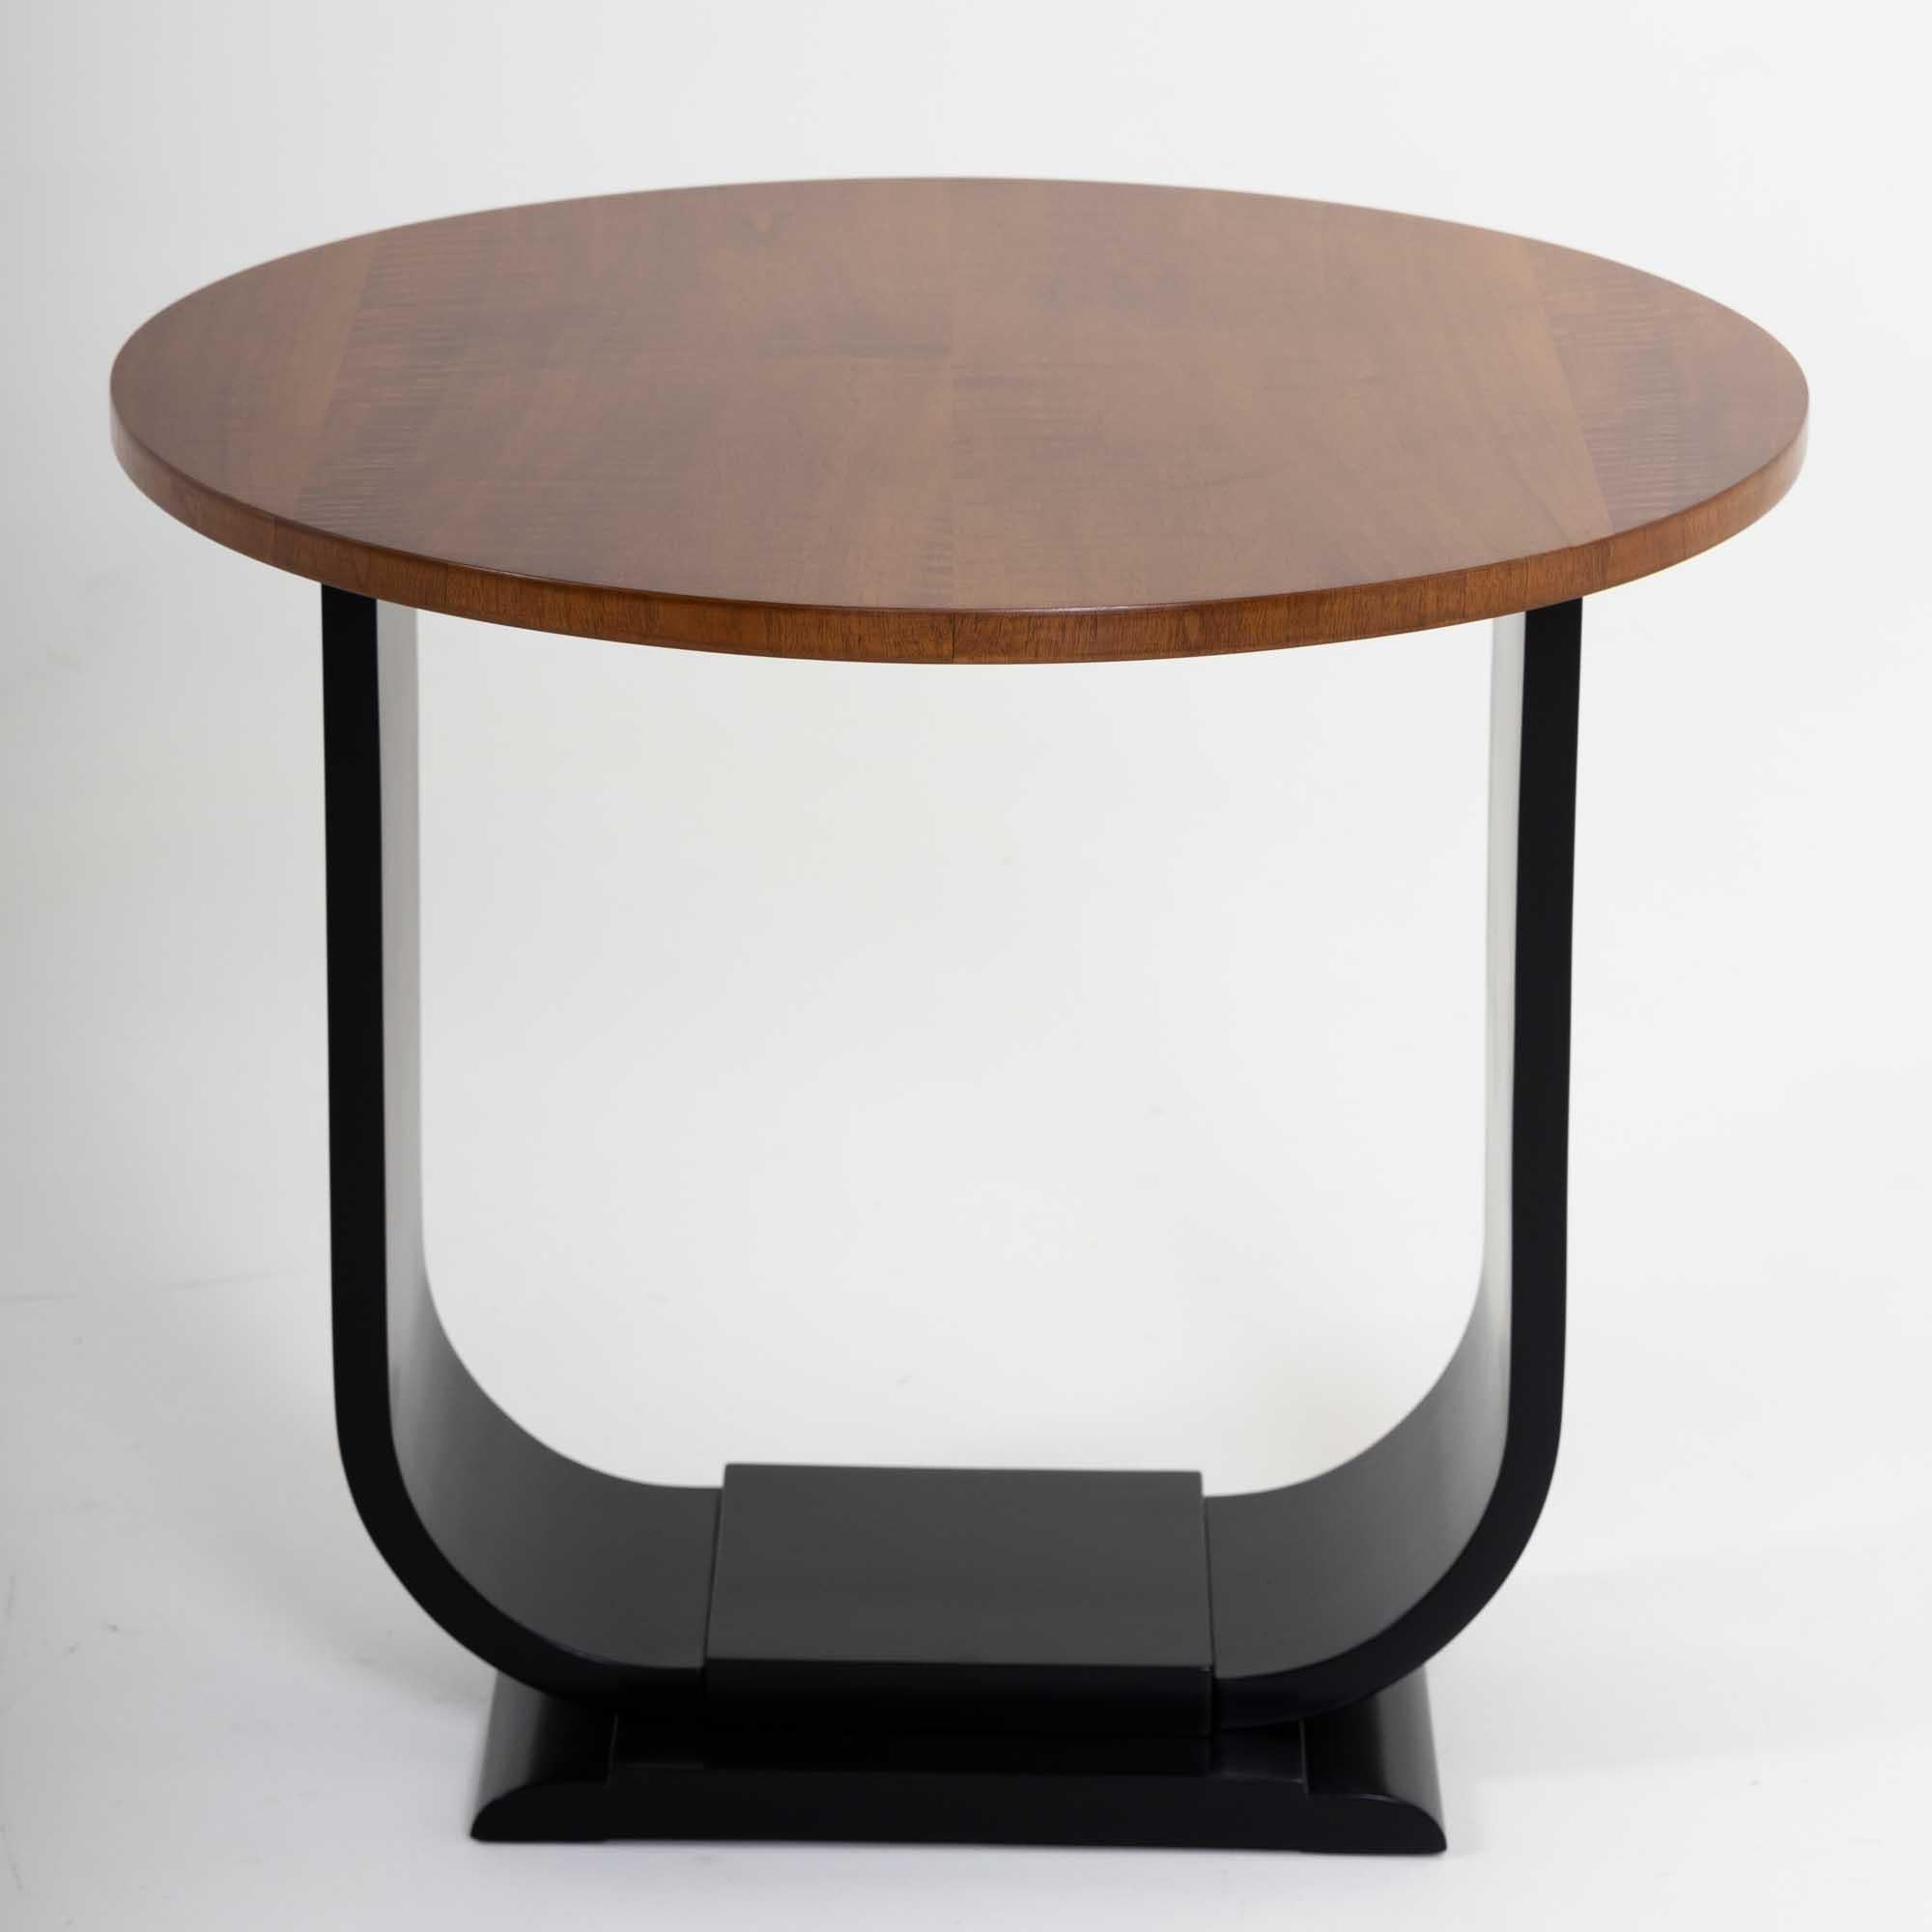 Small Art Deco side table with a round table top. The veneered table top forms an elegant contrast to the U-shaped ebonized base.